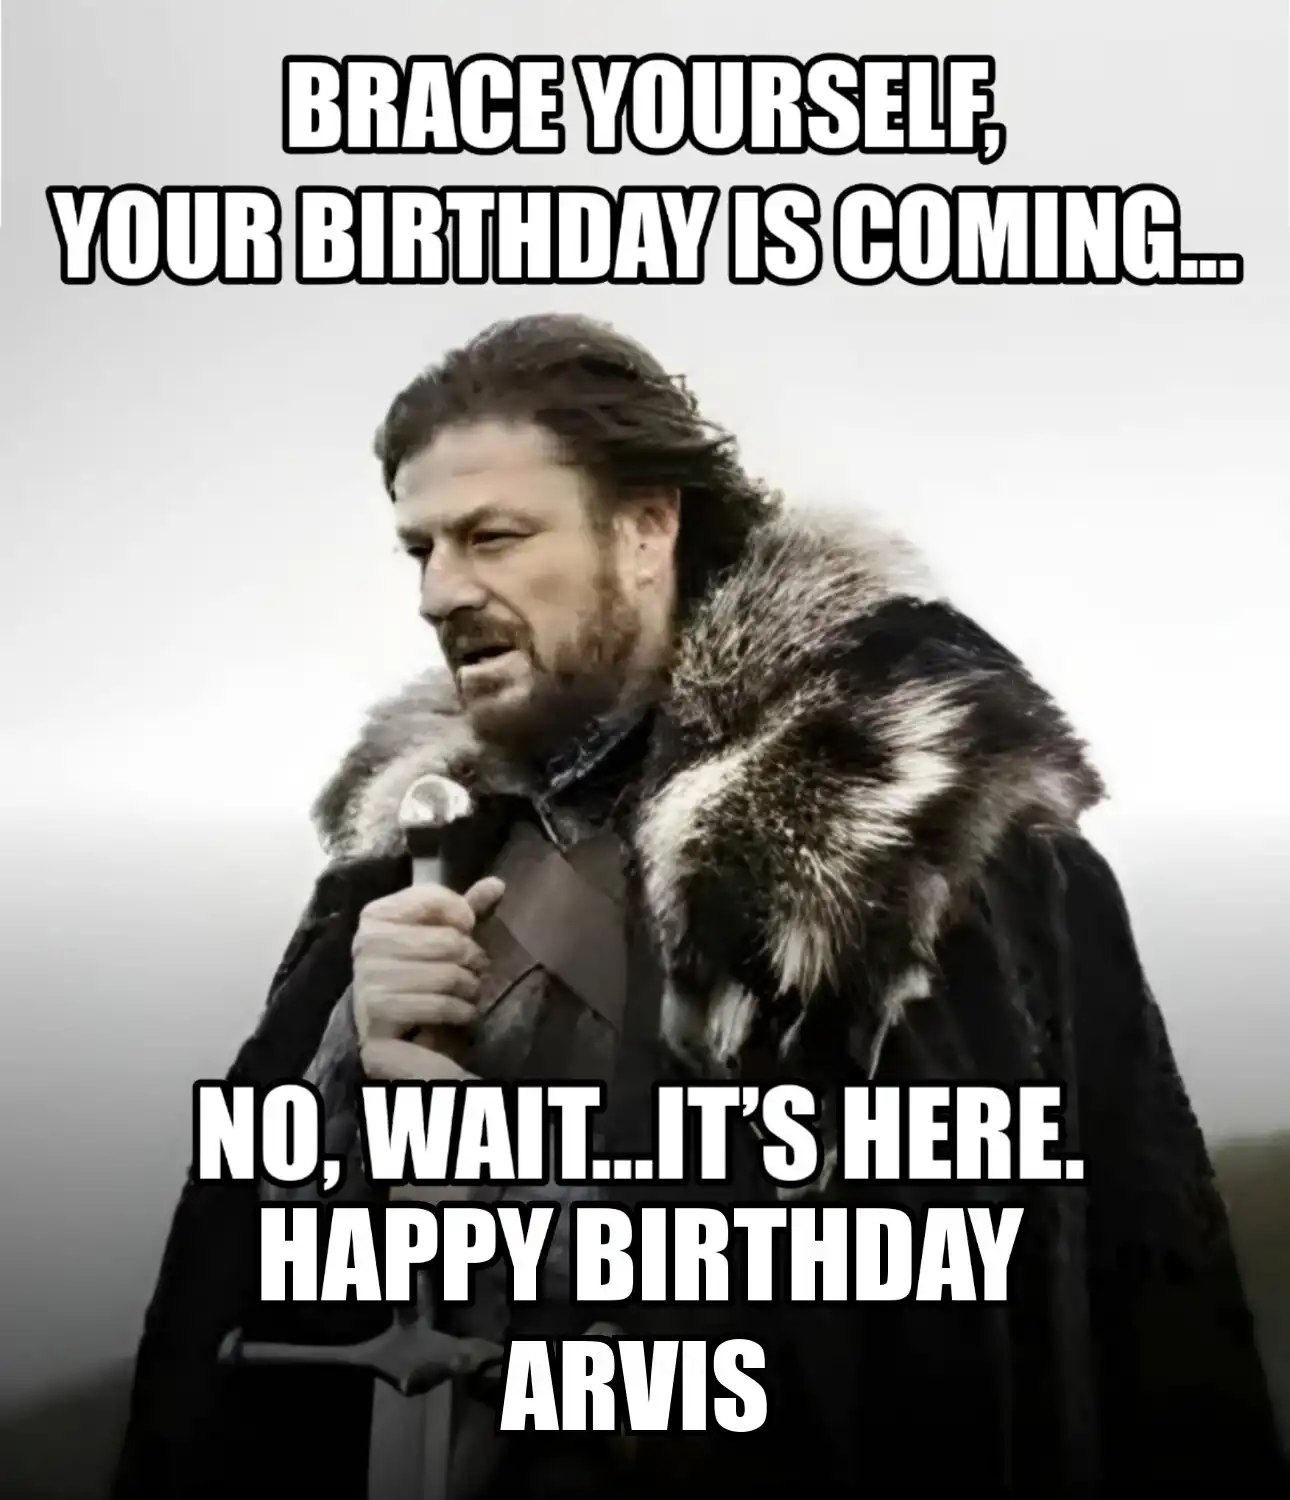 Happy Birthday Arvis Brace Yourself Your Birthday Is Coming Meme